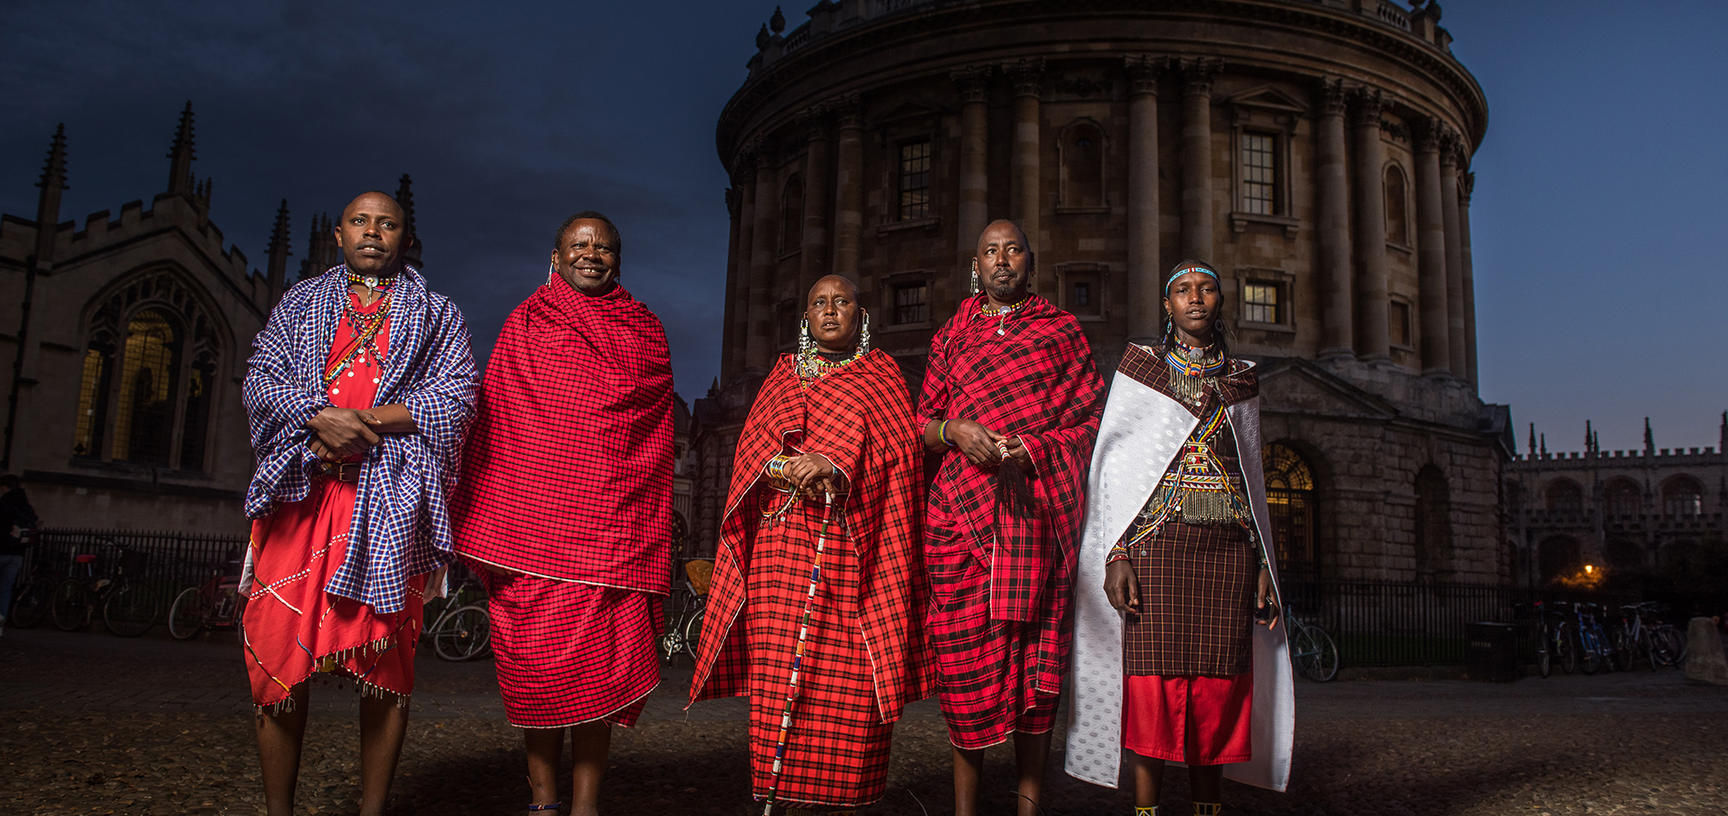 Maasai group in Radcliffe Square, Oxford